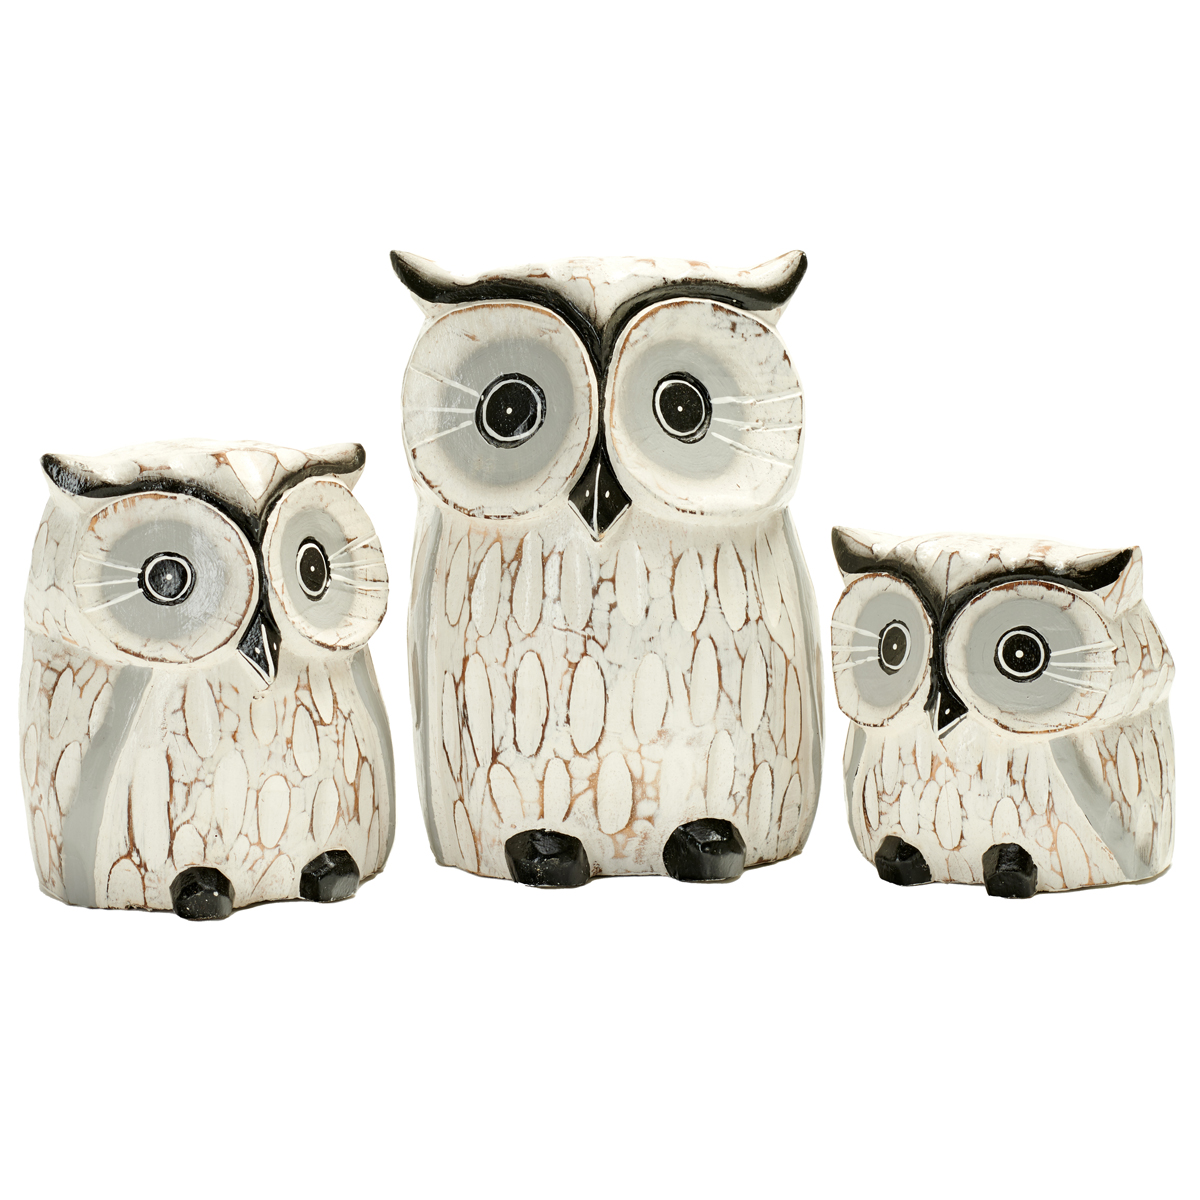 Family of three cartoon owls with etched feathers - Java Art